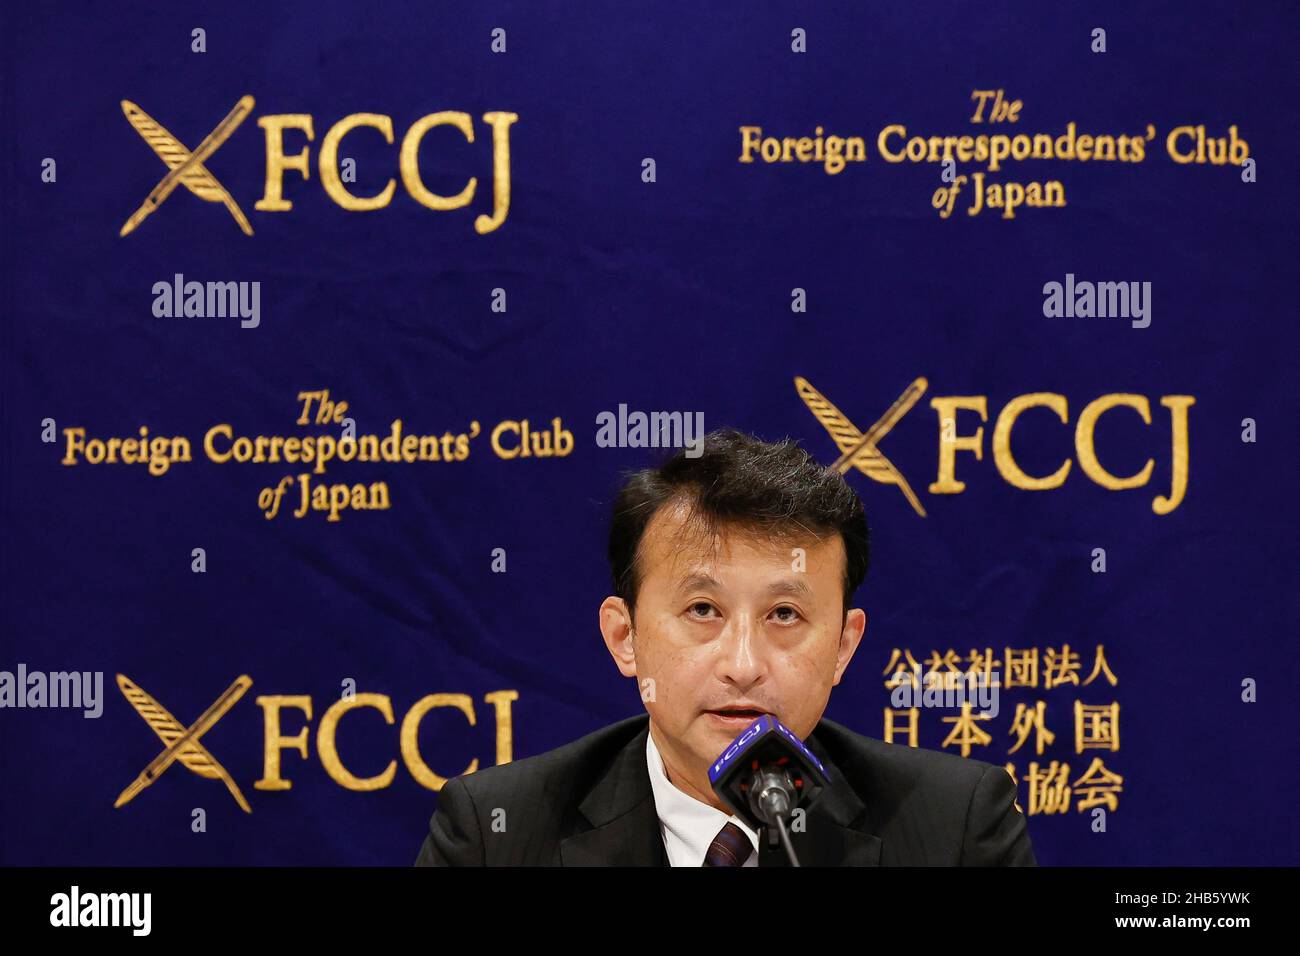 Tokyo, Japan. 17th Dec, 2021. Bonji Ohara, a senior fellow at the Sasakawa Peace Foundation, speaks during a news conference at The Foreign Correspondents' Club of Japan on December 17, 2021, Tokyo, Japan. Ohara spoke about the diplomatic relations between Japan and China and the consequences if Japan joins the US-led diplomatic boycott of the Beijing Winter Olympic Games over human rights abuses. Credit: Aflo Co. Ltd./Alamy Live News Stock Photo